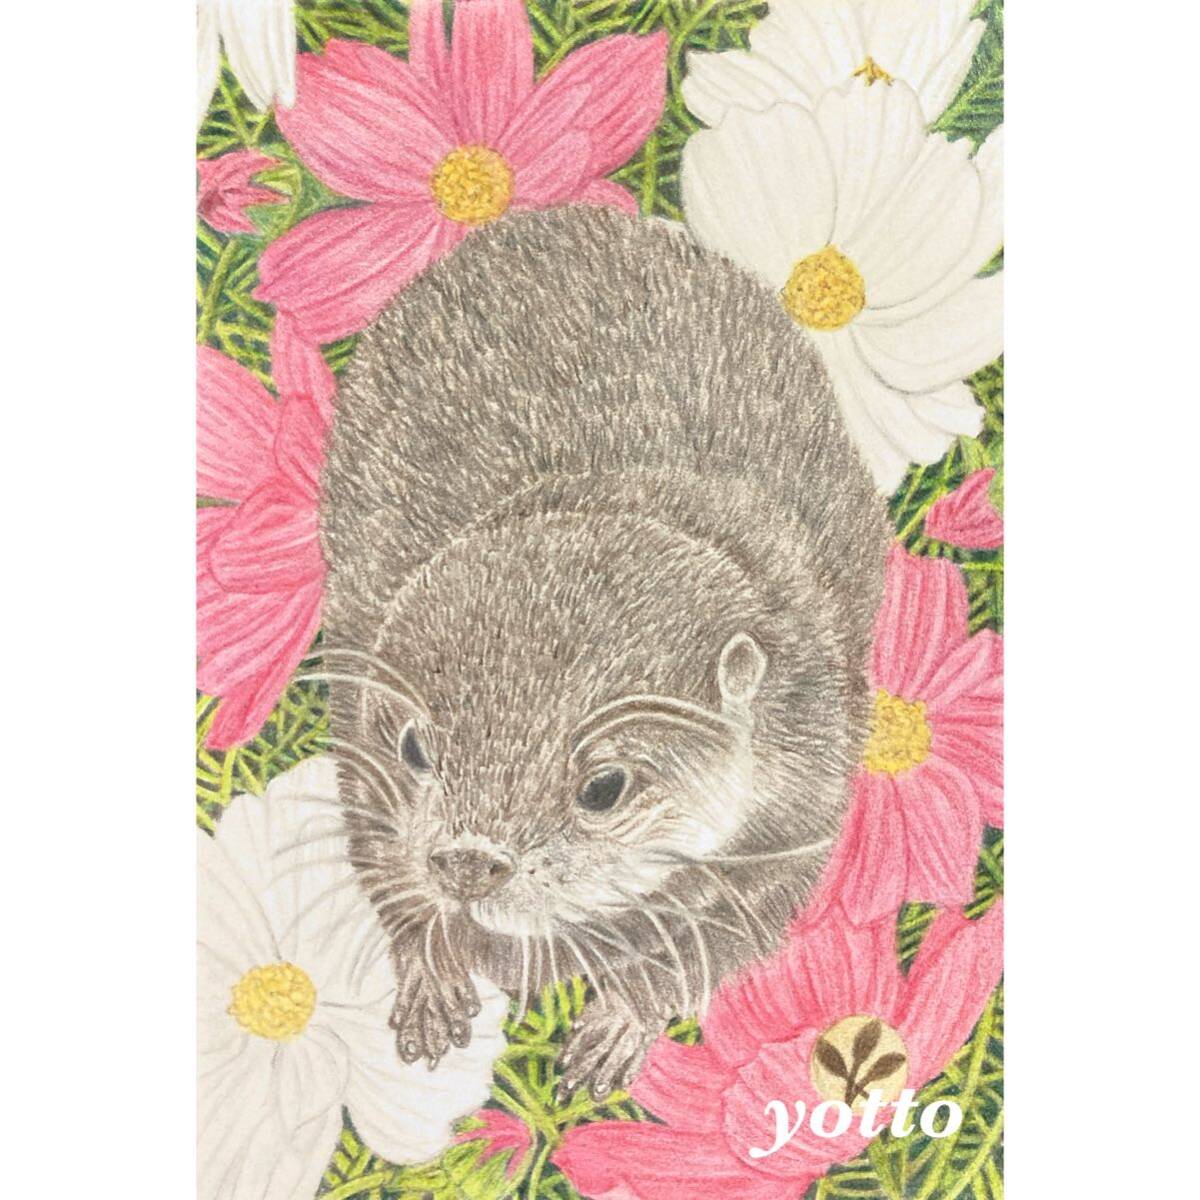 Colored pencil drawing Little-clawed otter Postcard size, with frame◇◆Hand-drawn◇Original drawing◆Little-clawed otter◇◆yotto, artwork, painting, pencil drawing, charcoal drawing